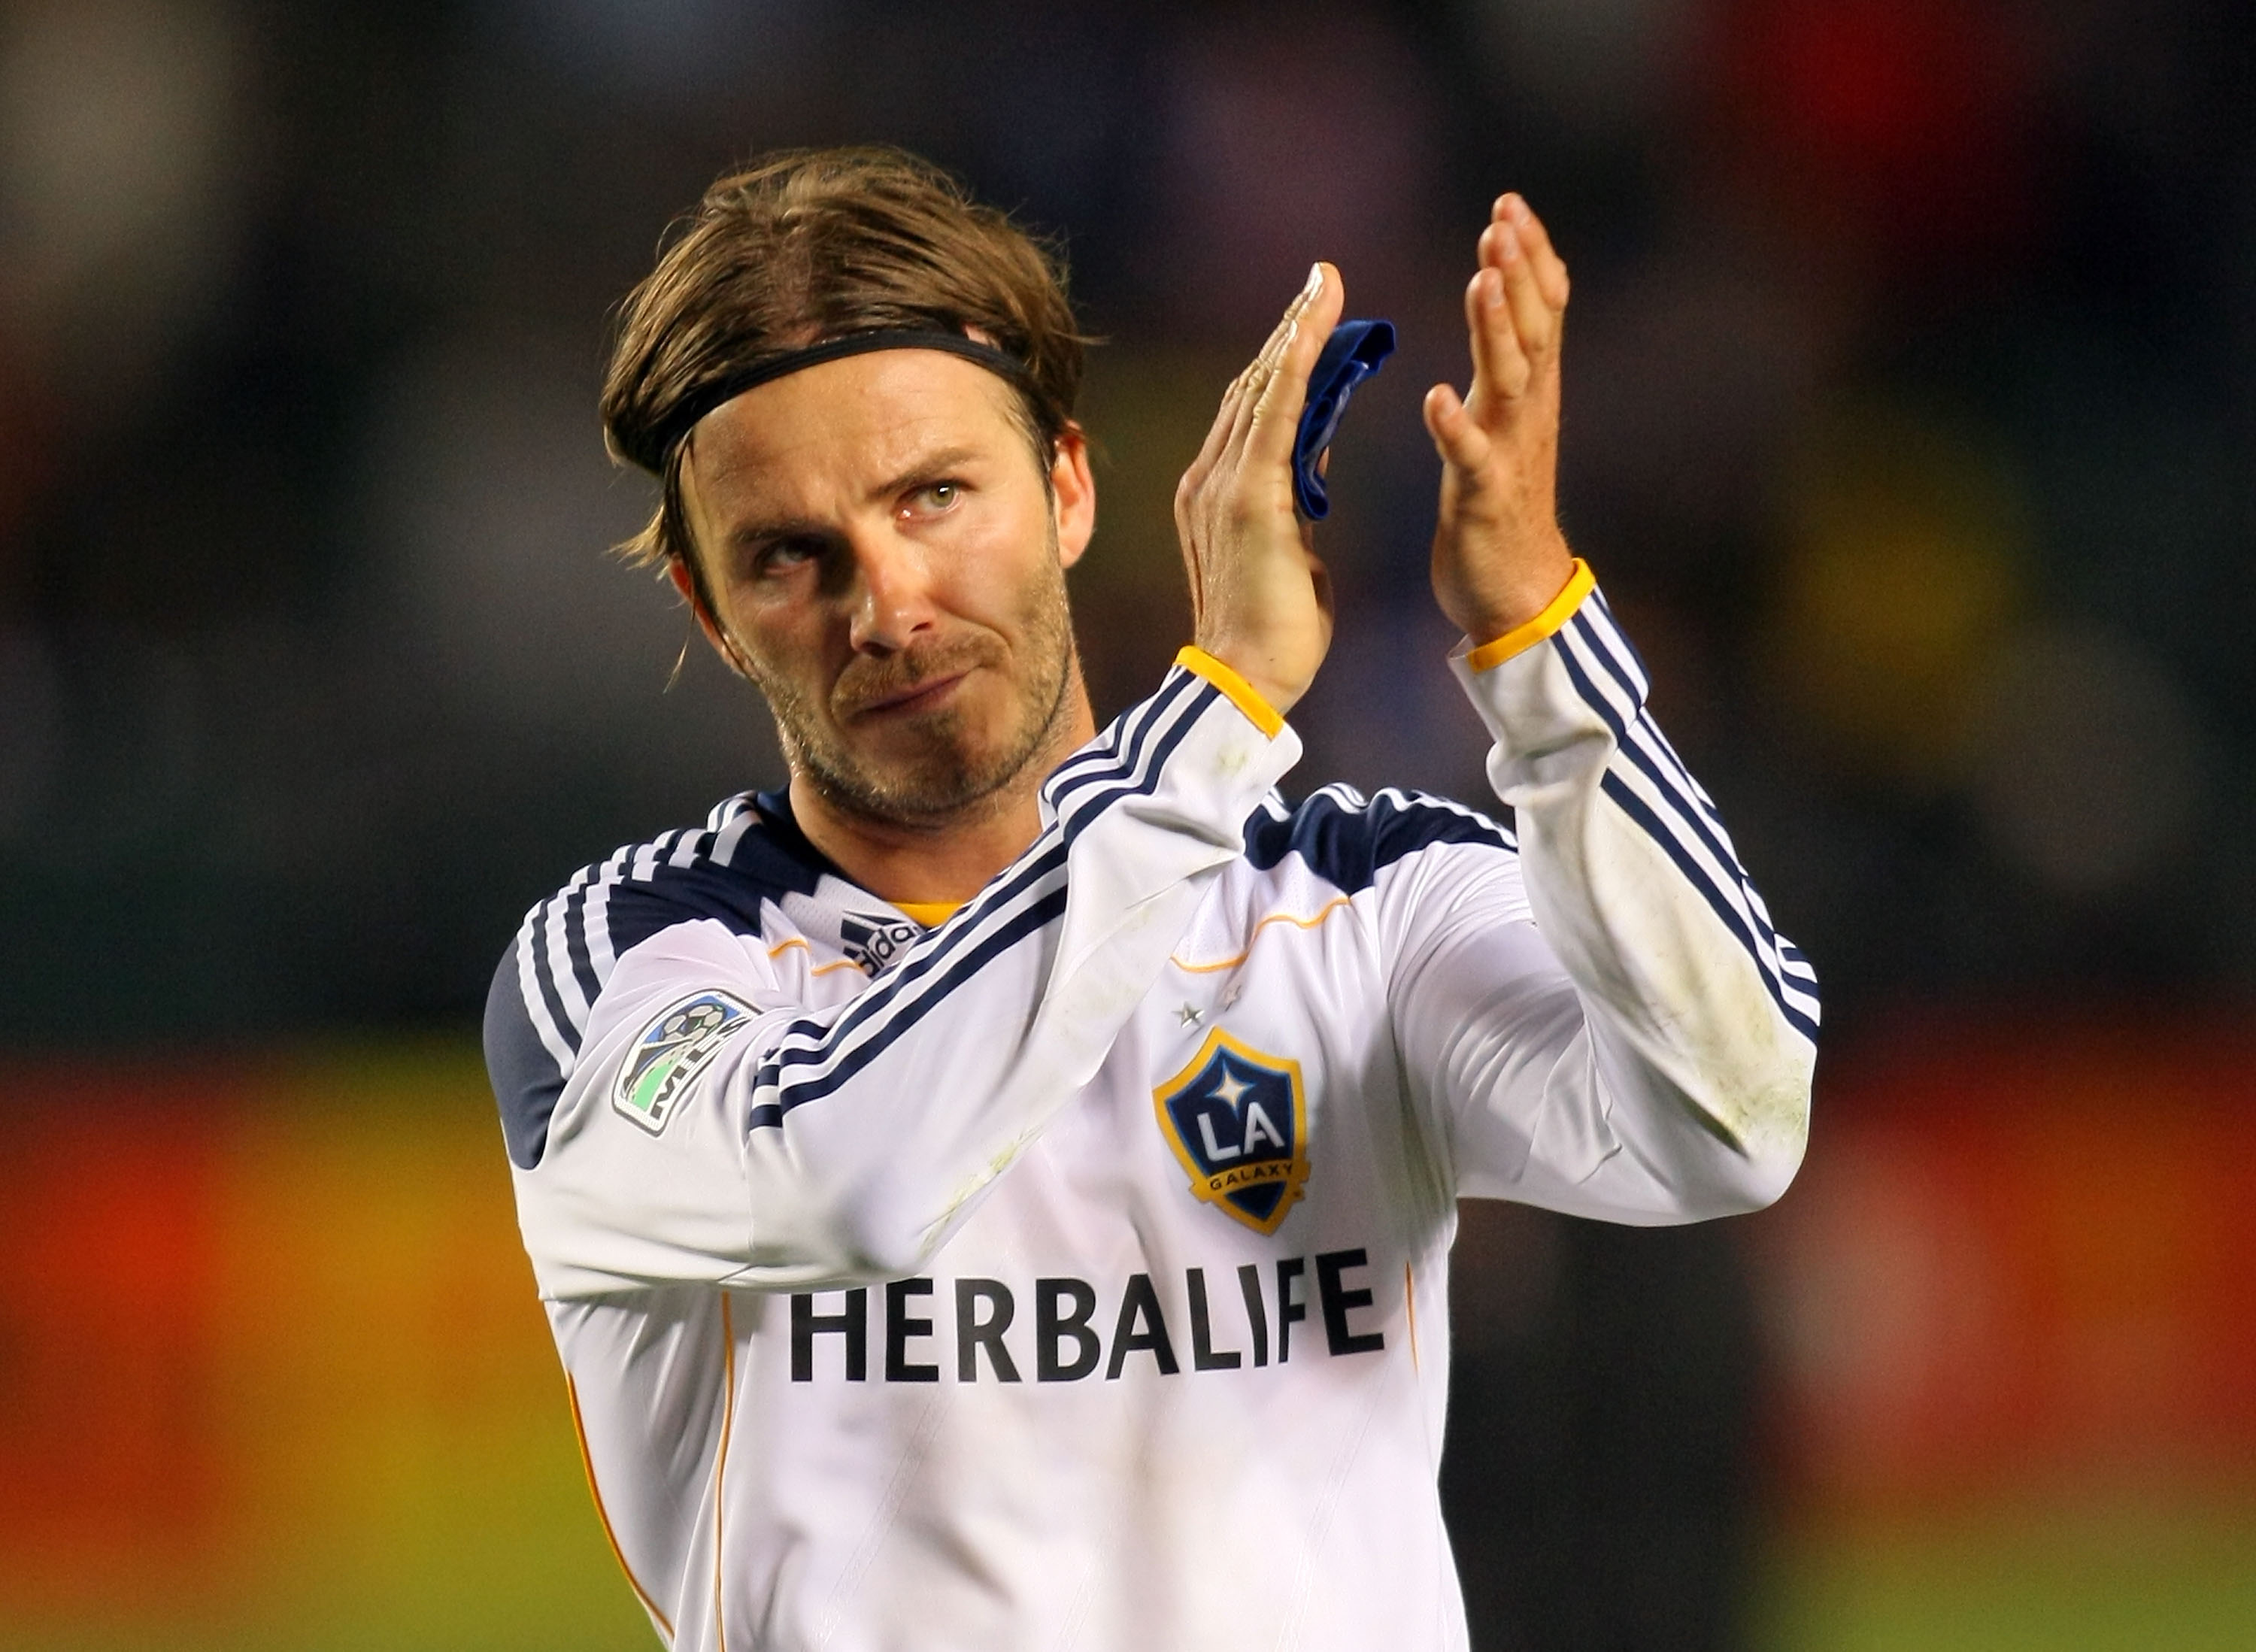 CARSON, CA - JUNE 03:  David Beckham #23 of the Los Angeles Galaxy applauds to the fans after their MLS match against D.C. United at The Home Depot Center on June 3, 2011 in Carson, California. United and the Galaxy played to a 0-0 draw.  (Photo by Victor